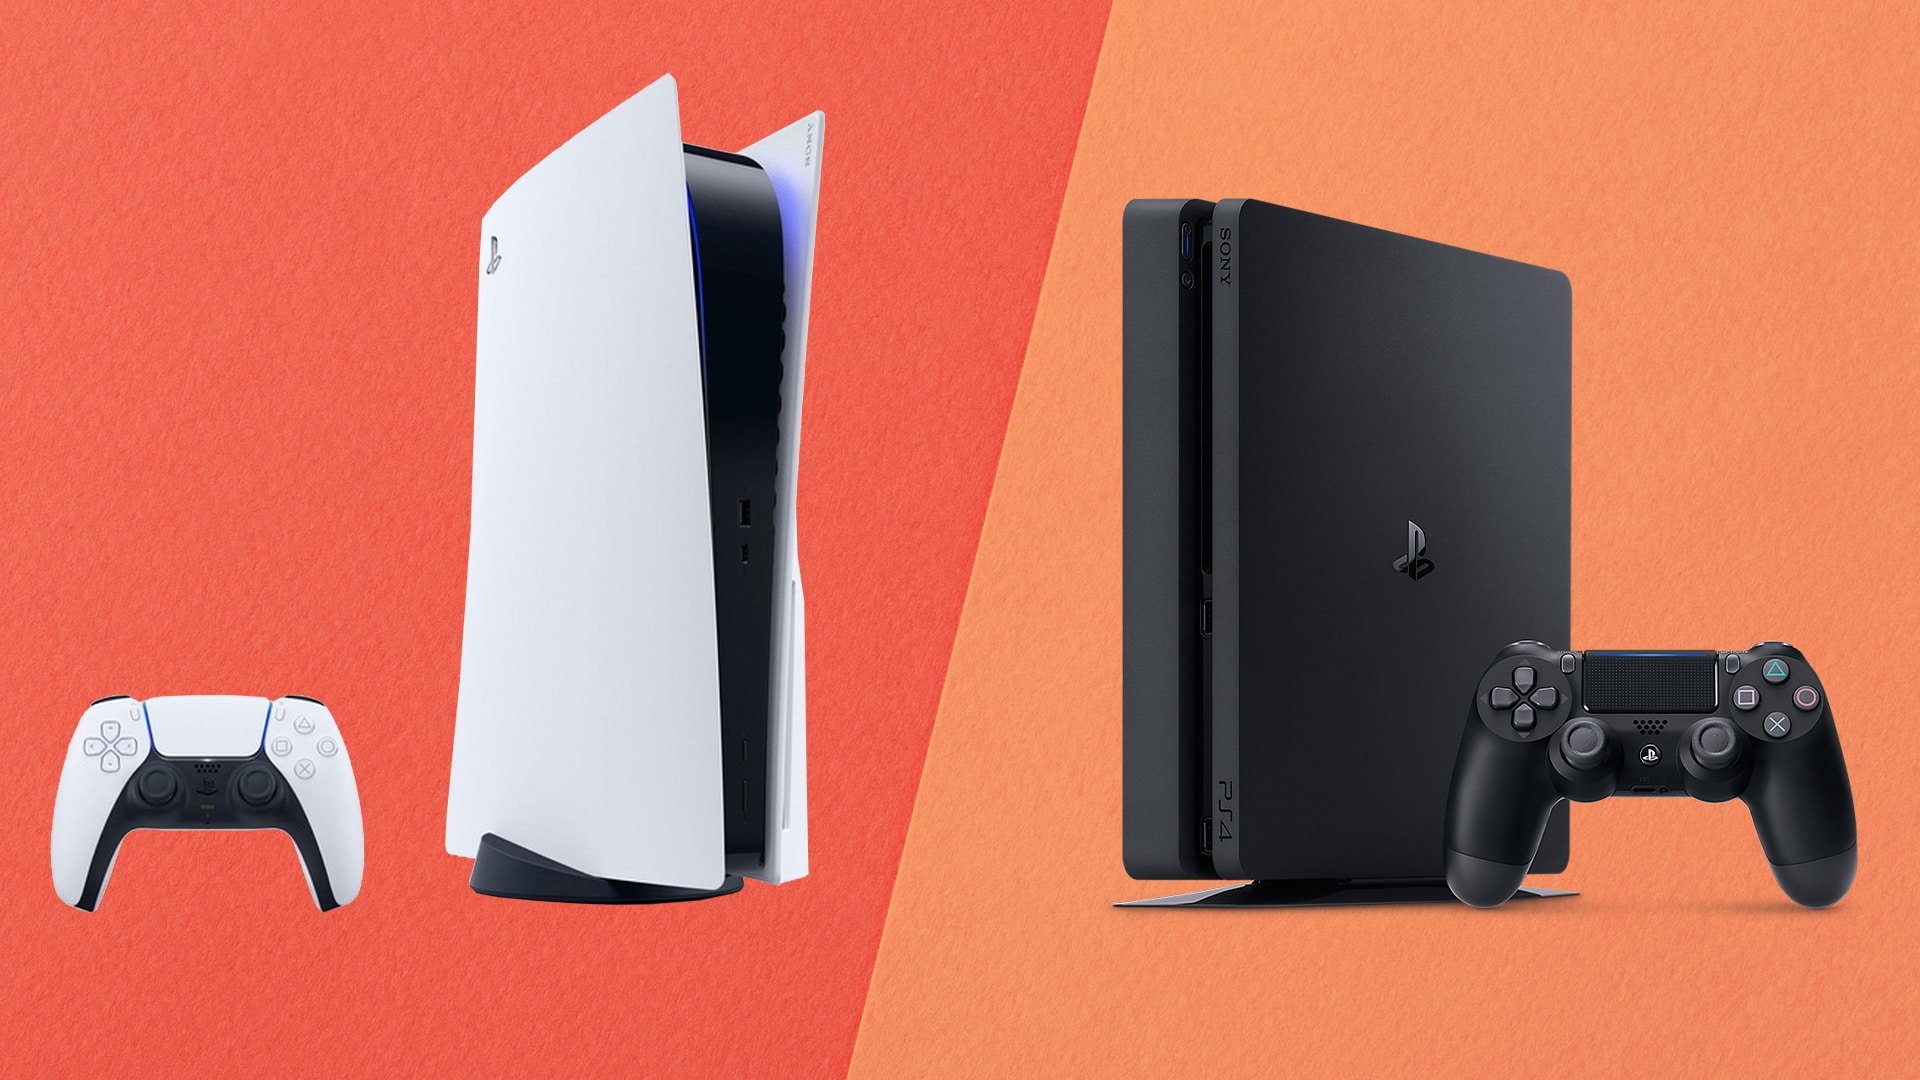 Not ready to get a PlayStation 5? Maybe a PS4 Pro is right for you. 2021